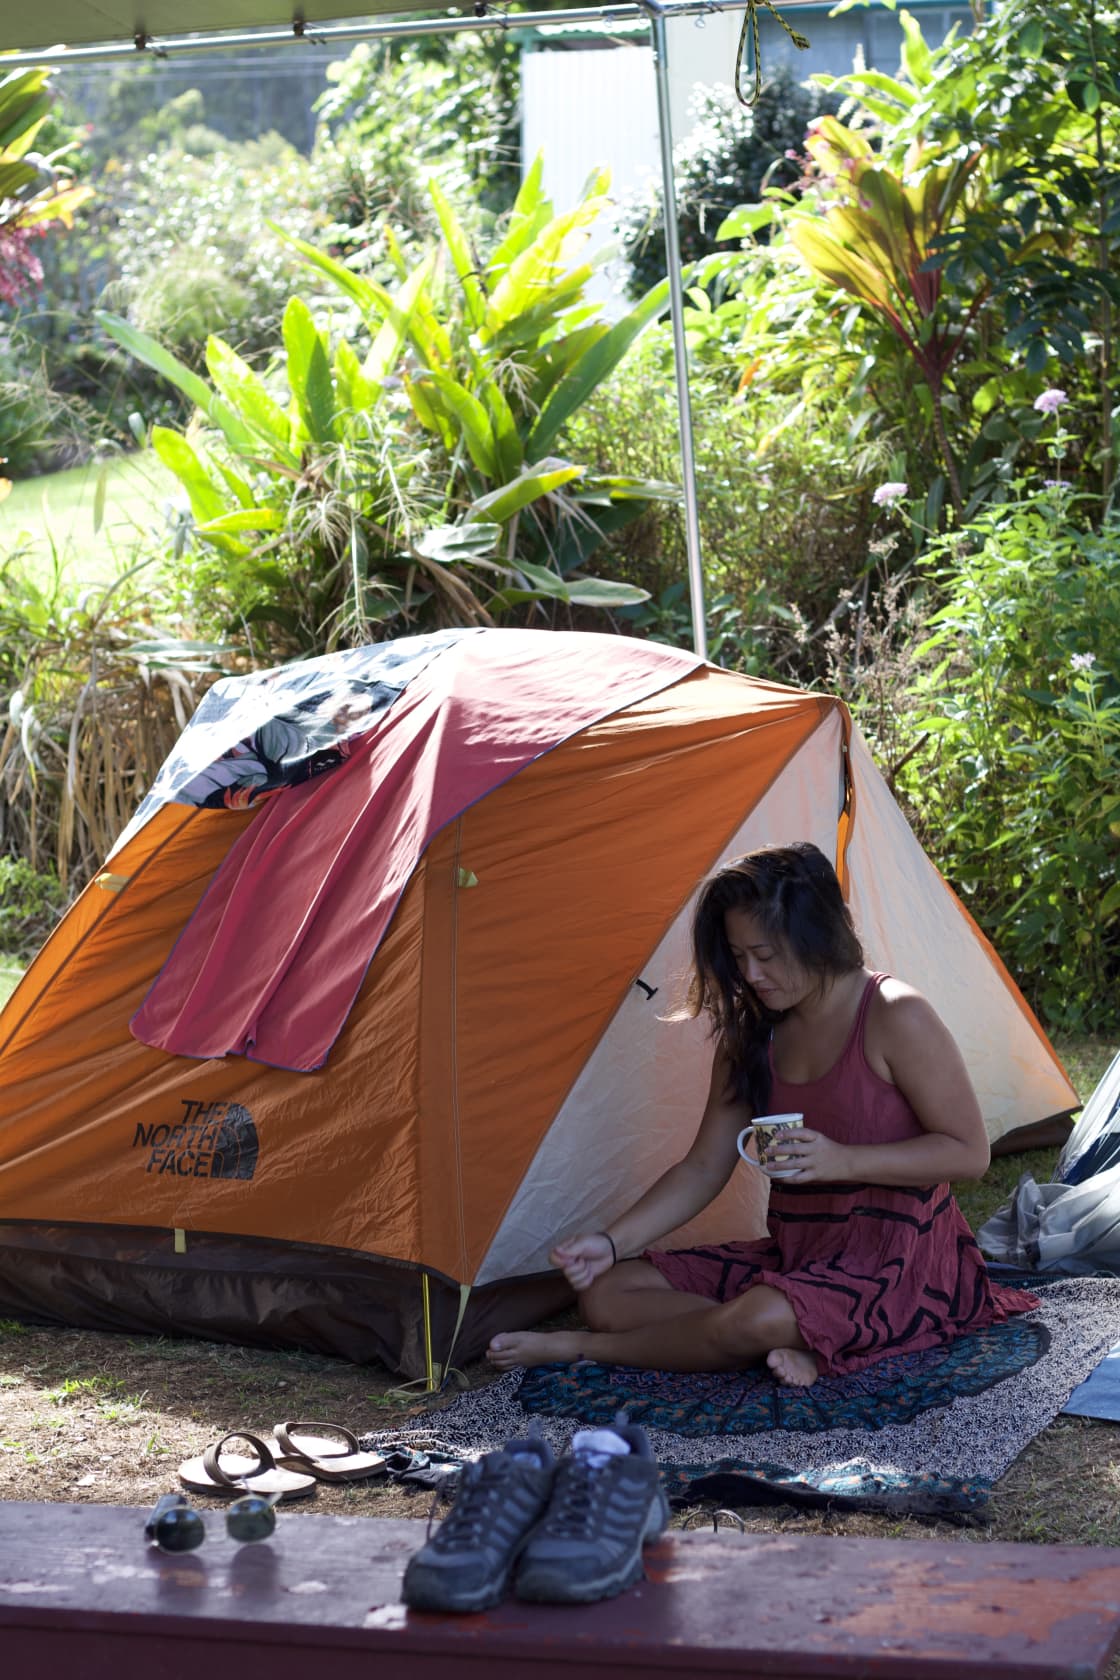 We loved this campsite, right by Waipio Valley - there's no better place to stay